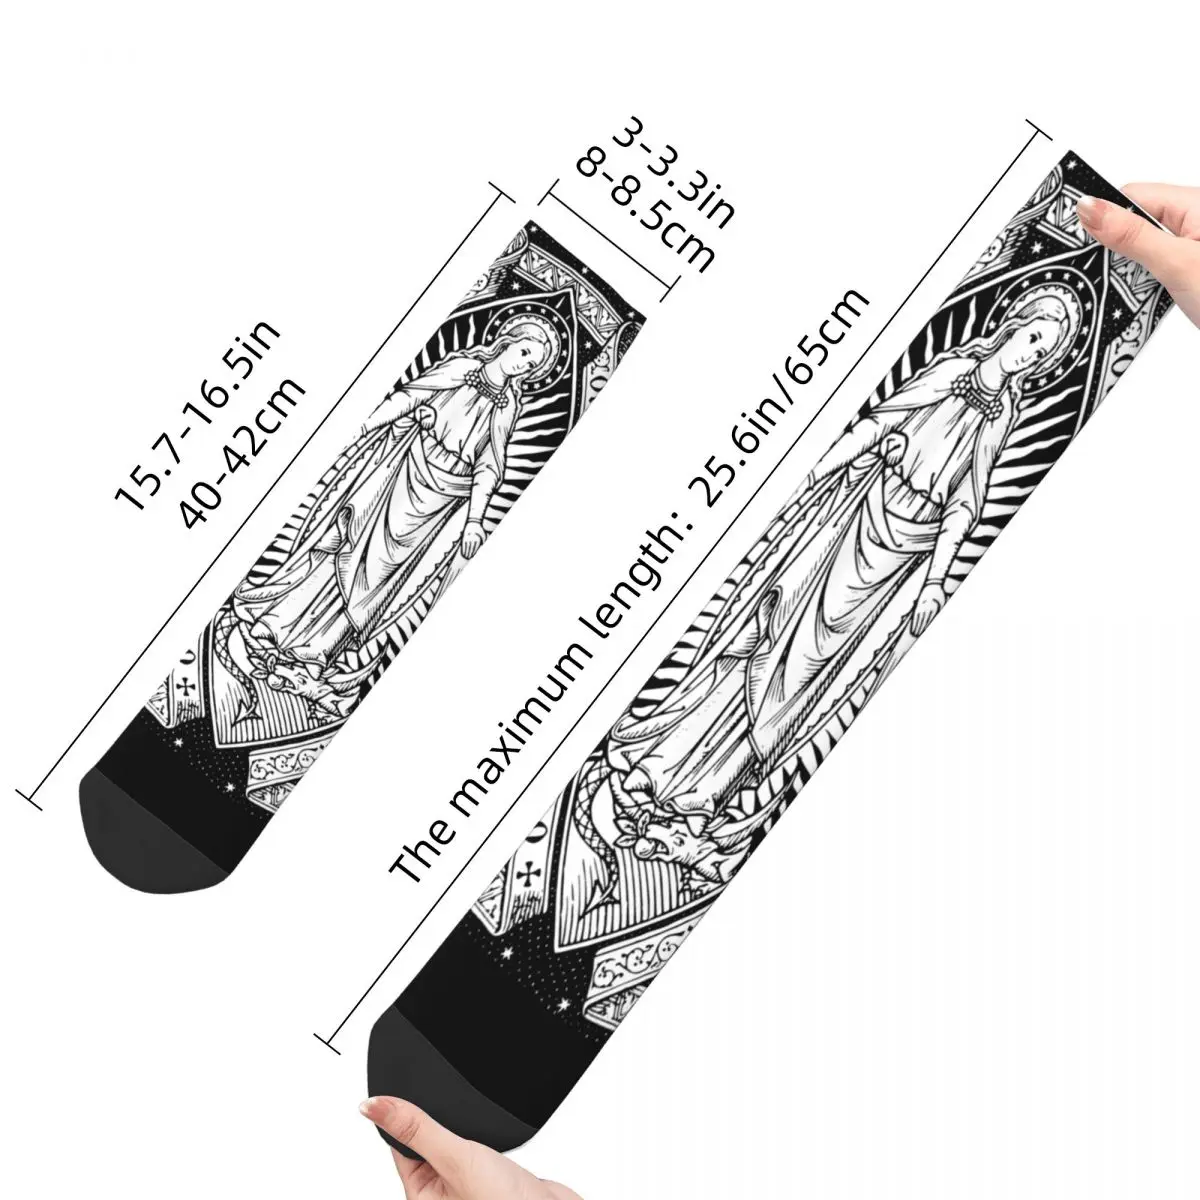 Crazy Design Vintage Virgin Mary Engraving Design Theme Print Socks Accessories Our Lady of Guadalupe Crew Socks Sweat Absorbing images - 6